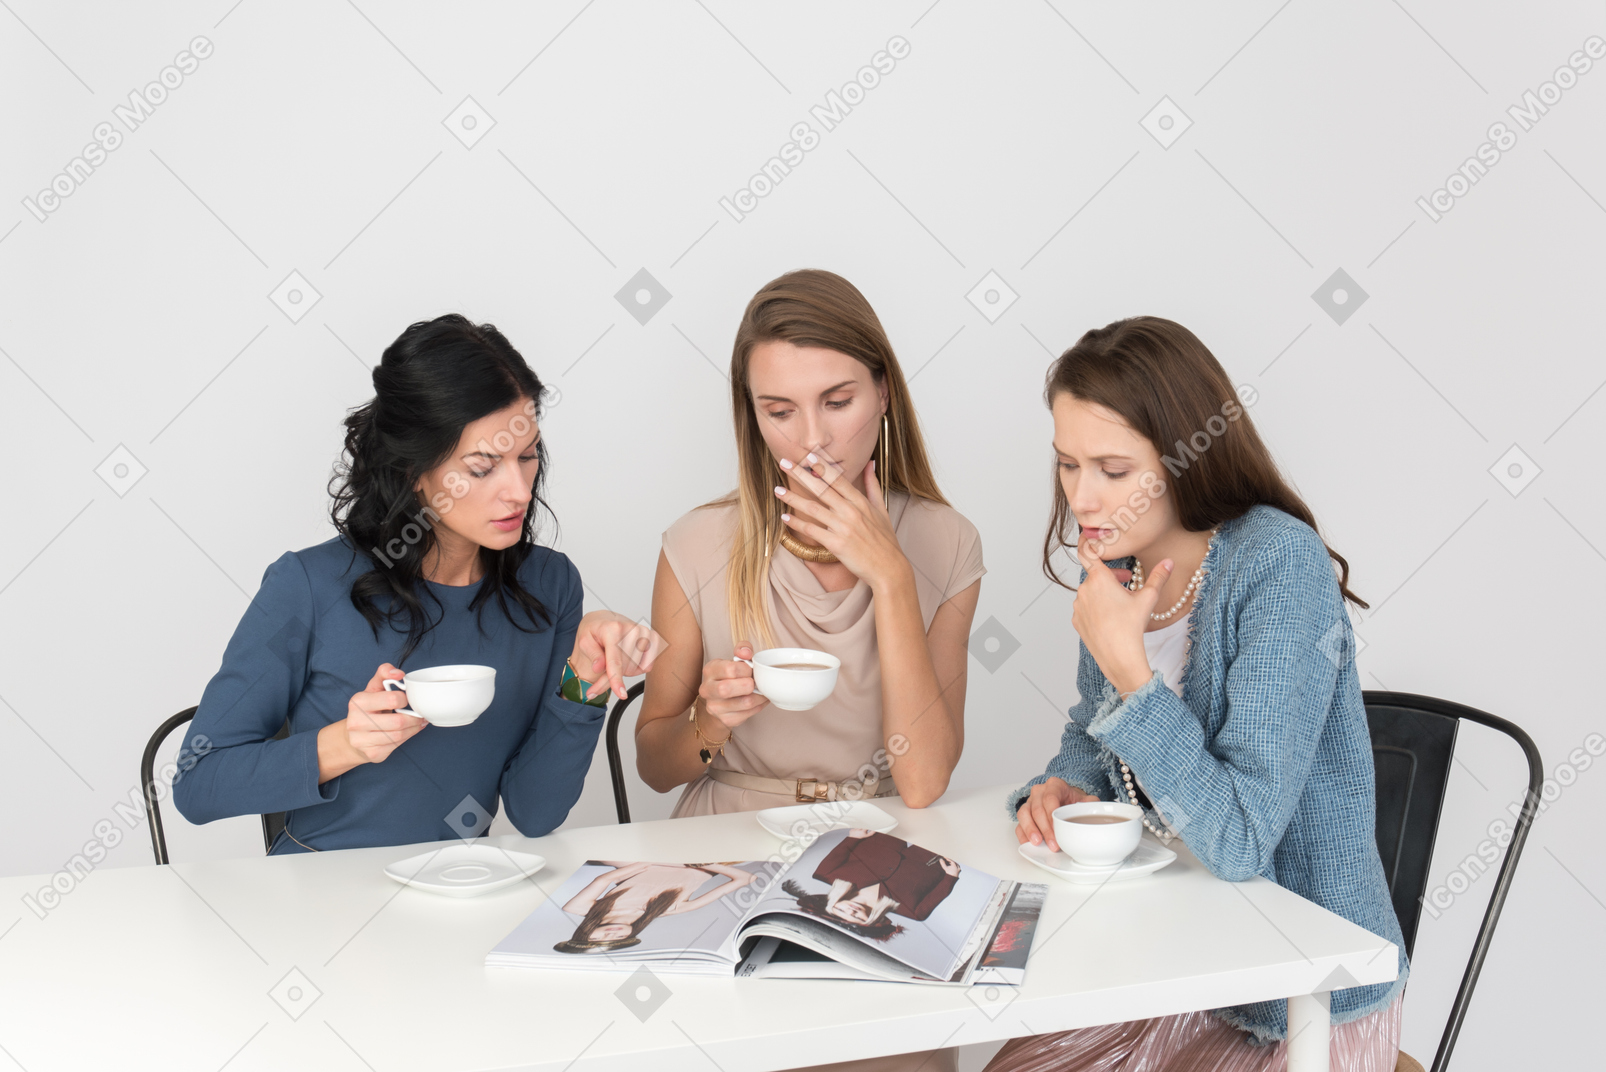 Girls' chatting, coffee and just chilling